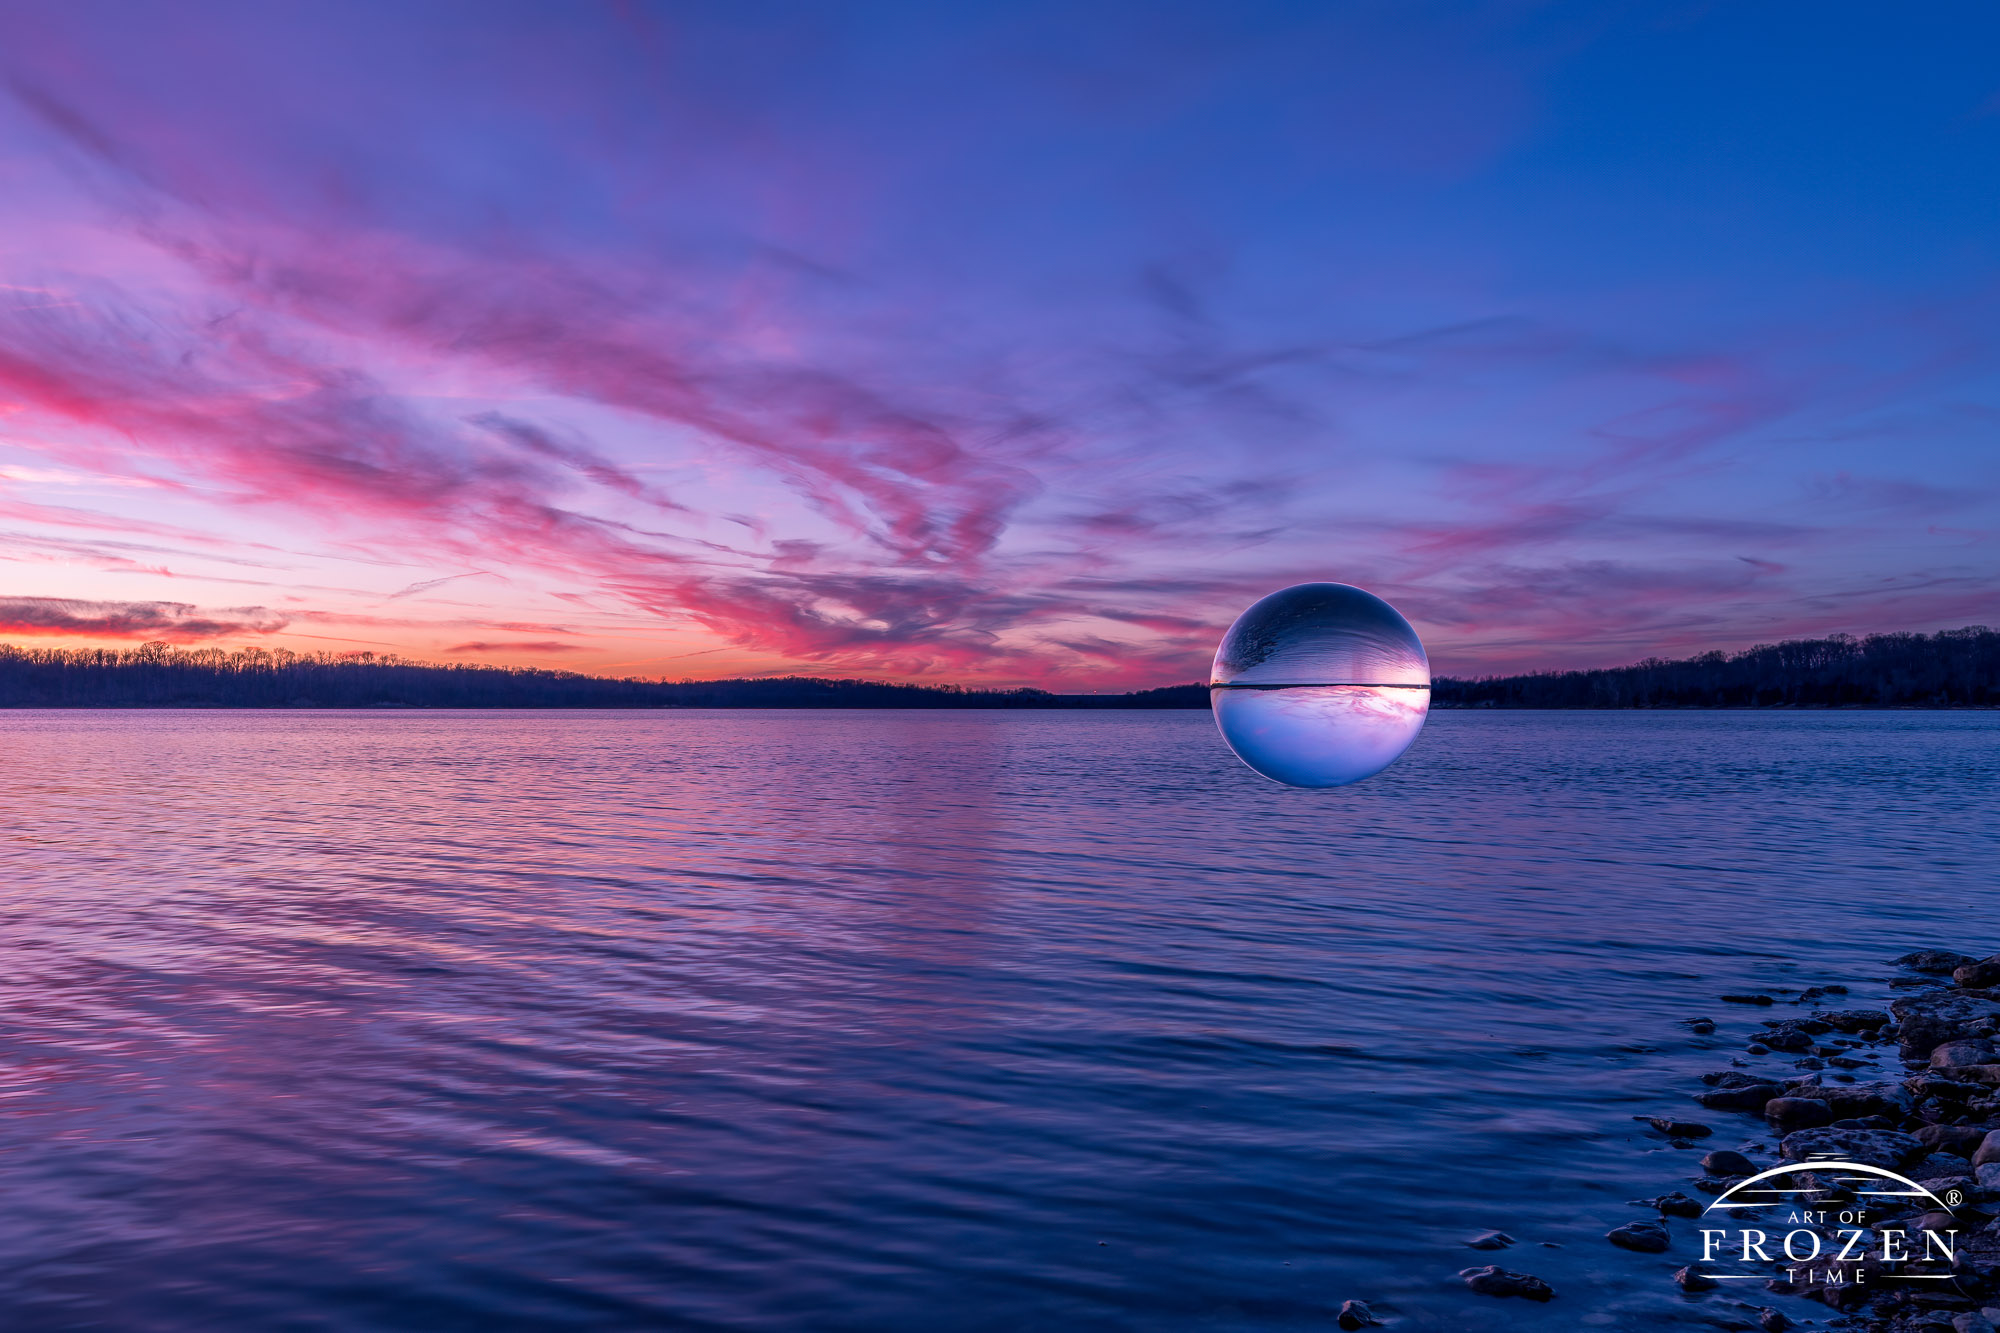 A crystal sphere held at eye level during a colorful sunset which inverts the impressive sky and the lake's surface